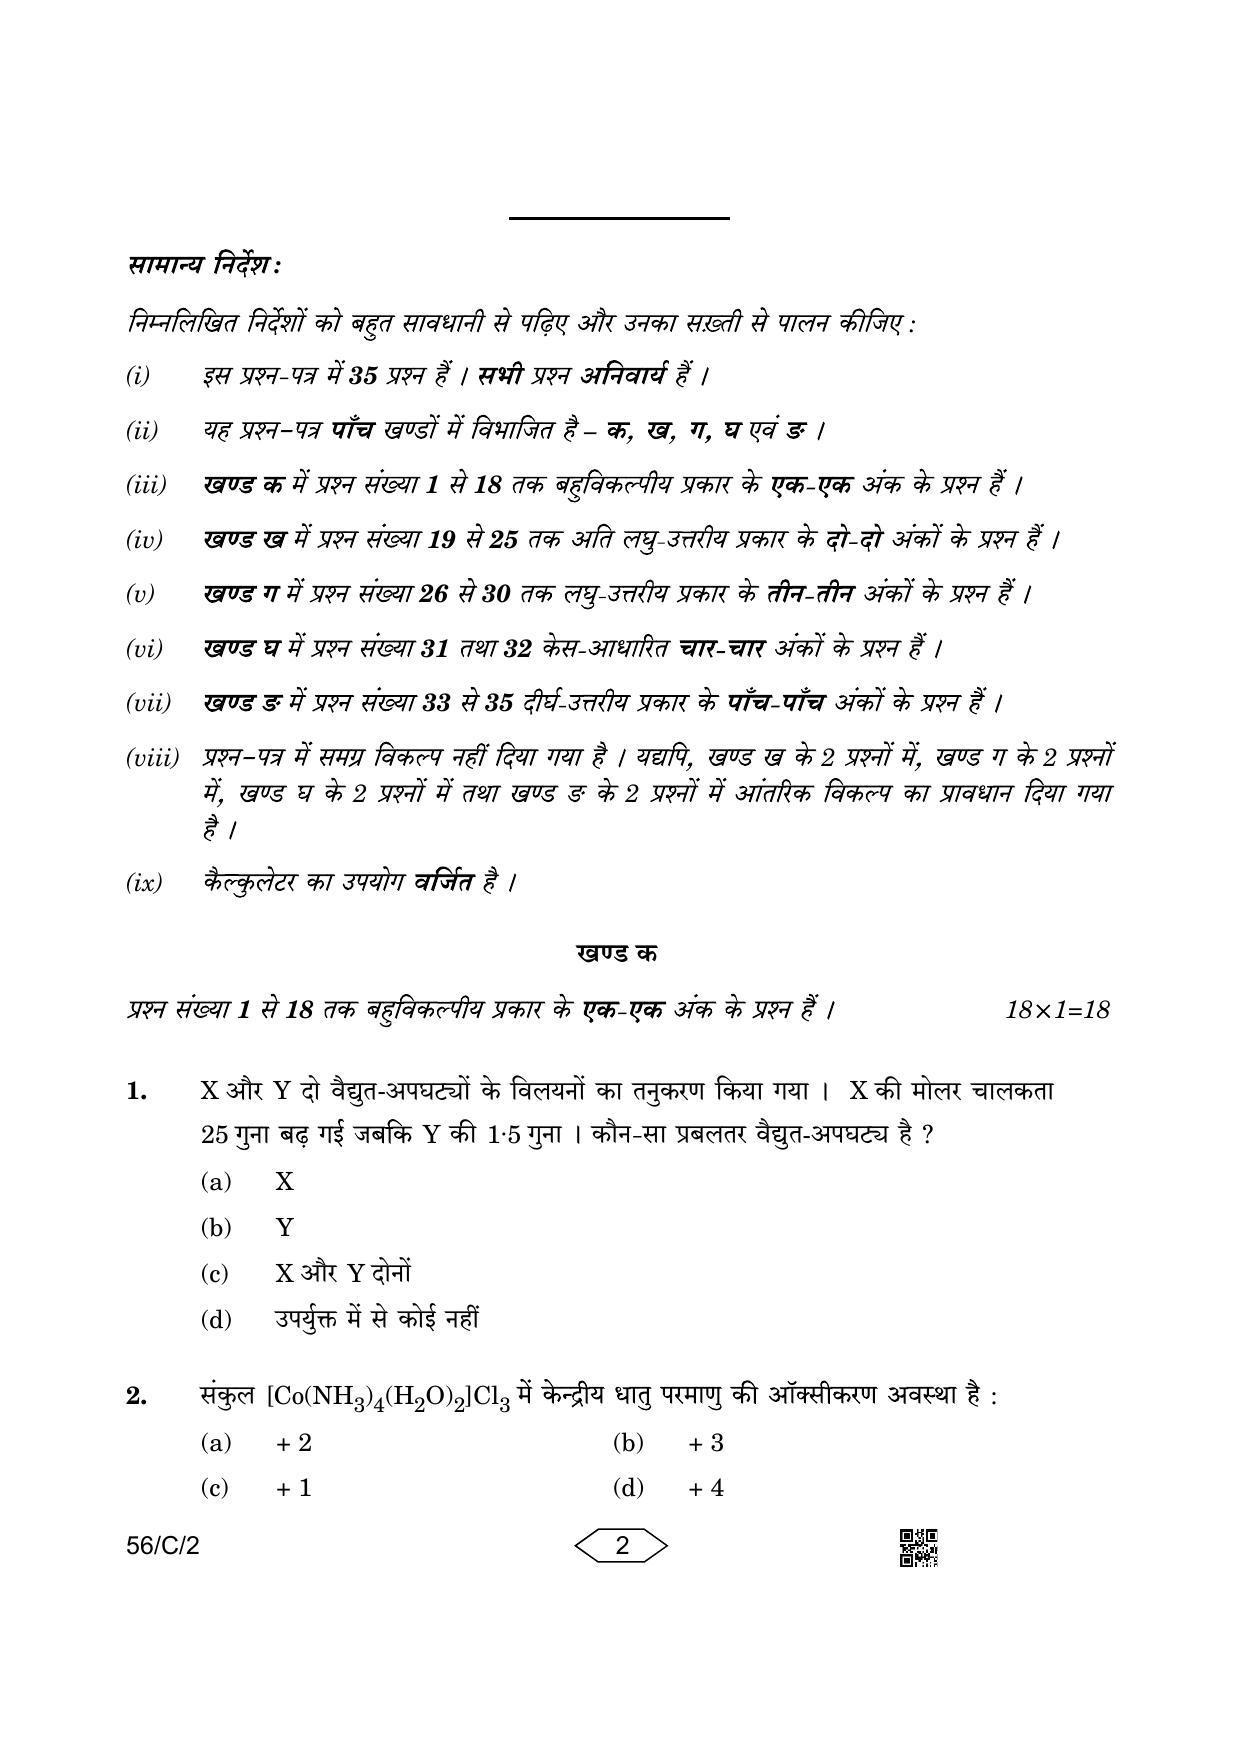 CBSE Class 12 56-2 Chemistry 2023 (Compartment) Question Paper - Page 2